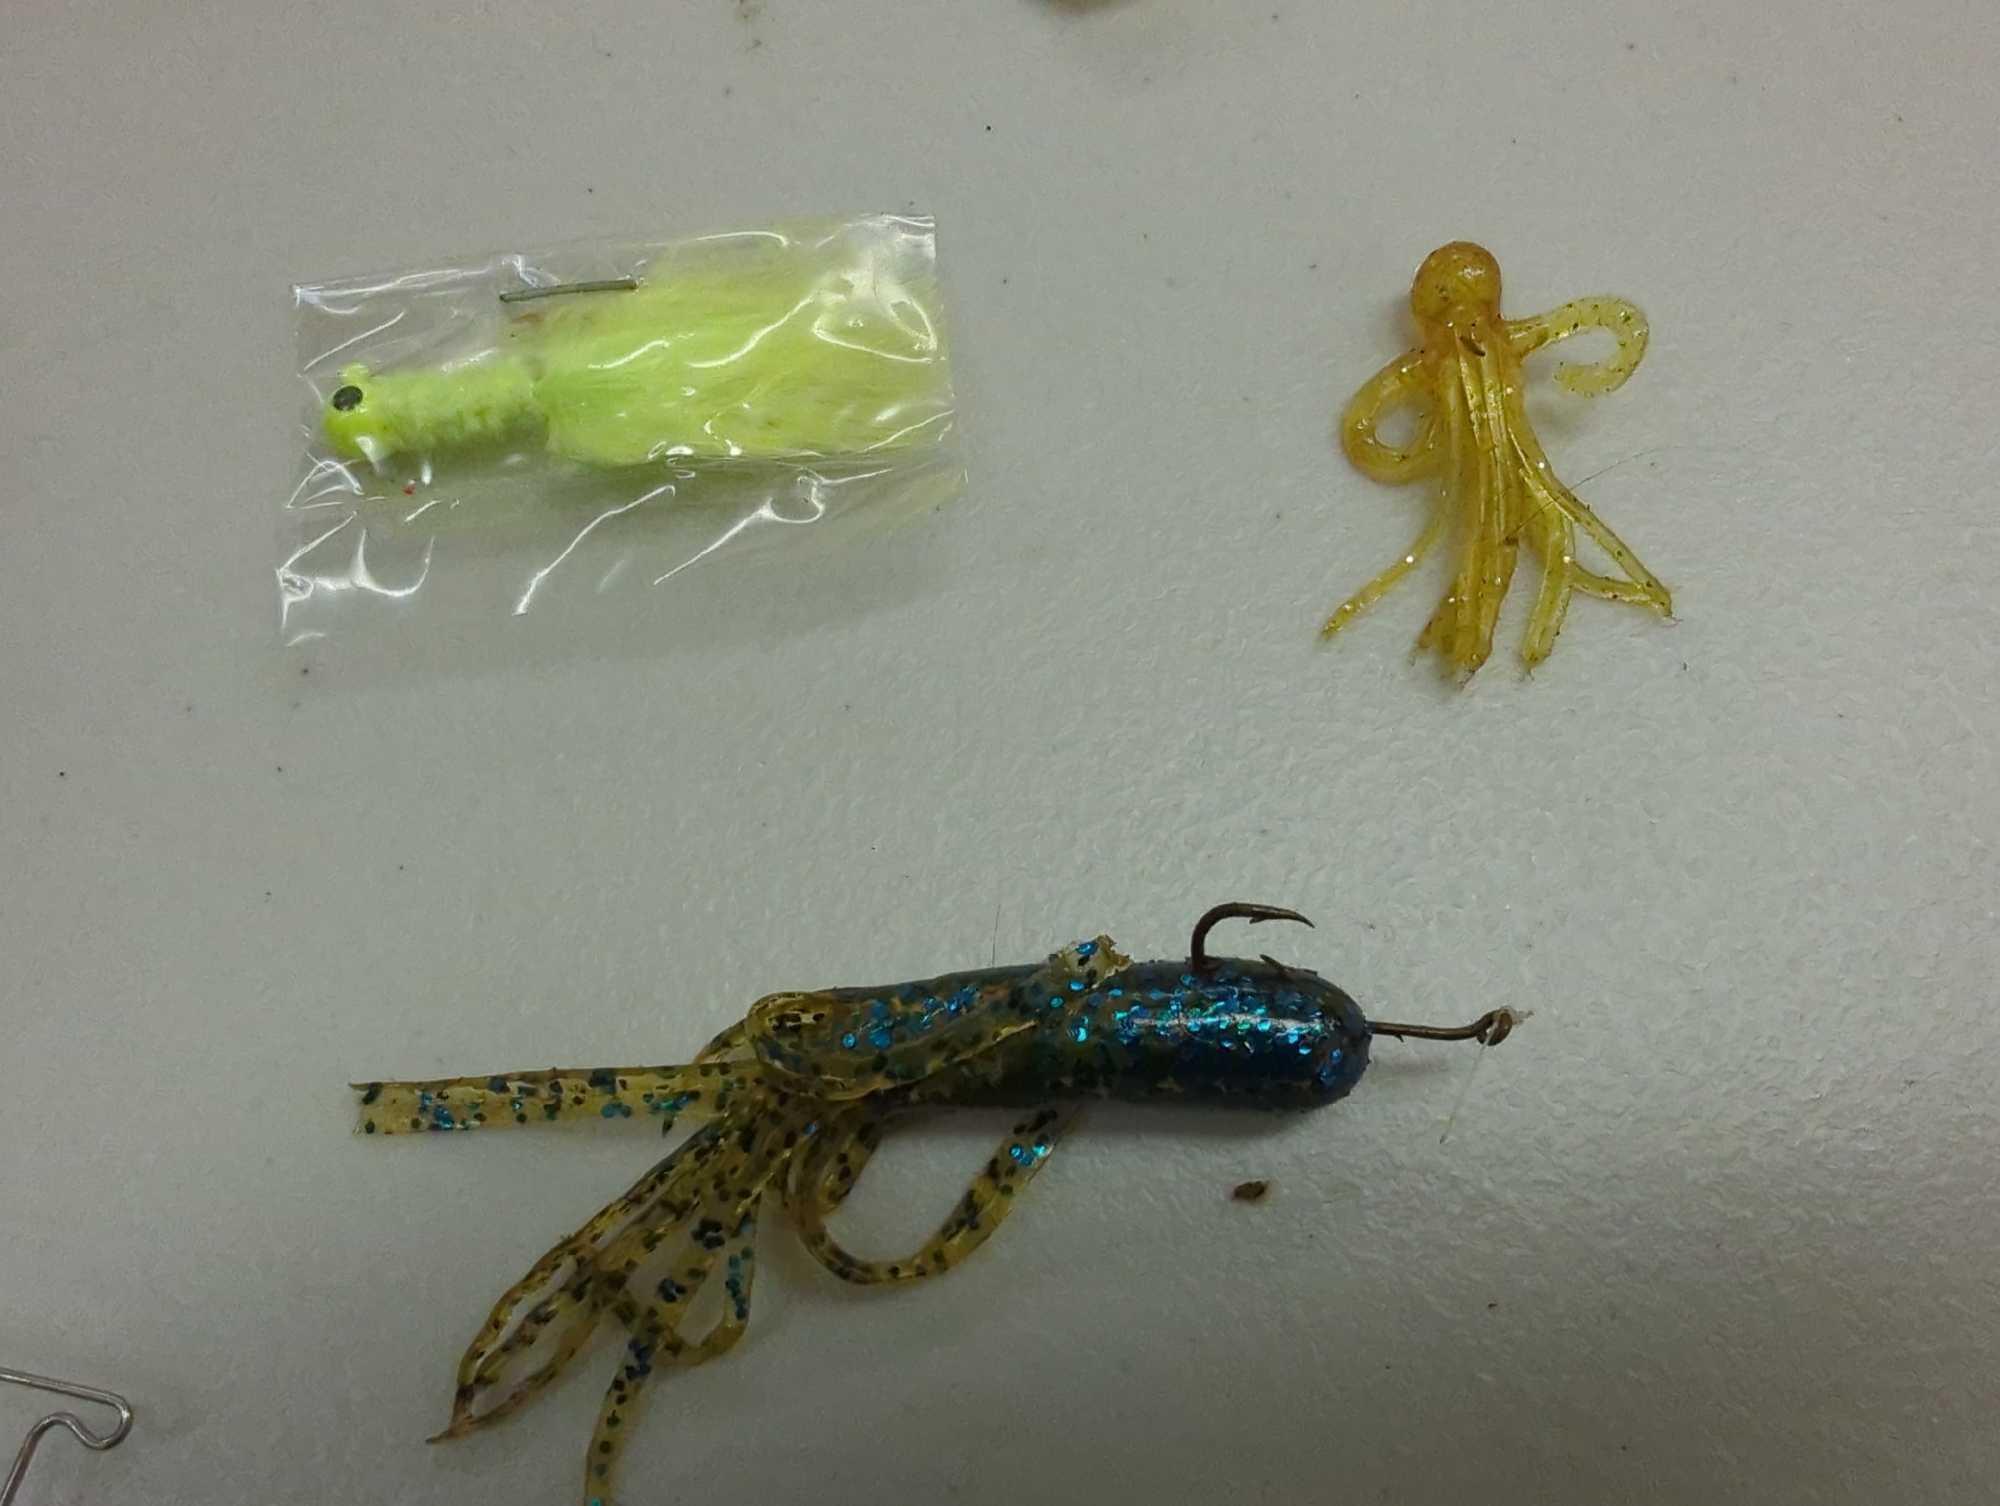 Tackle Box and contents includes a wire variety of fishing lures as are shown in photos. Comes as